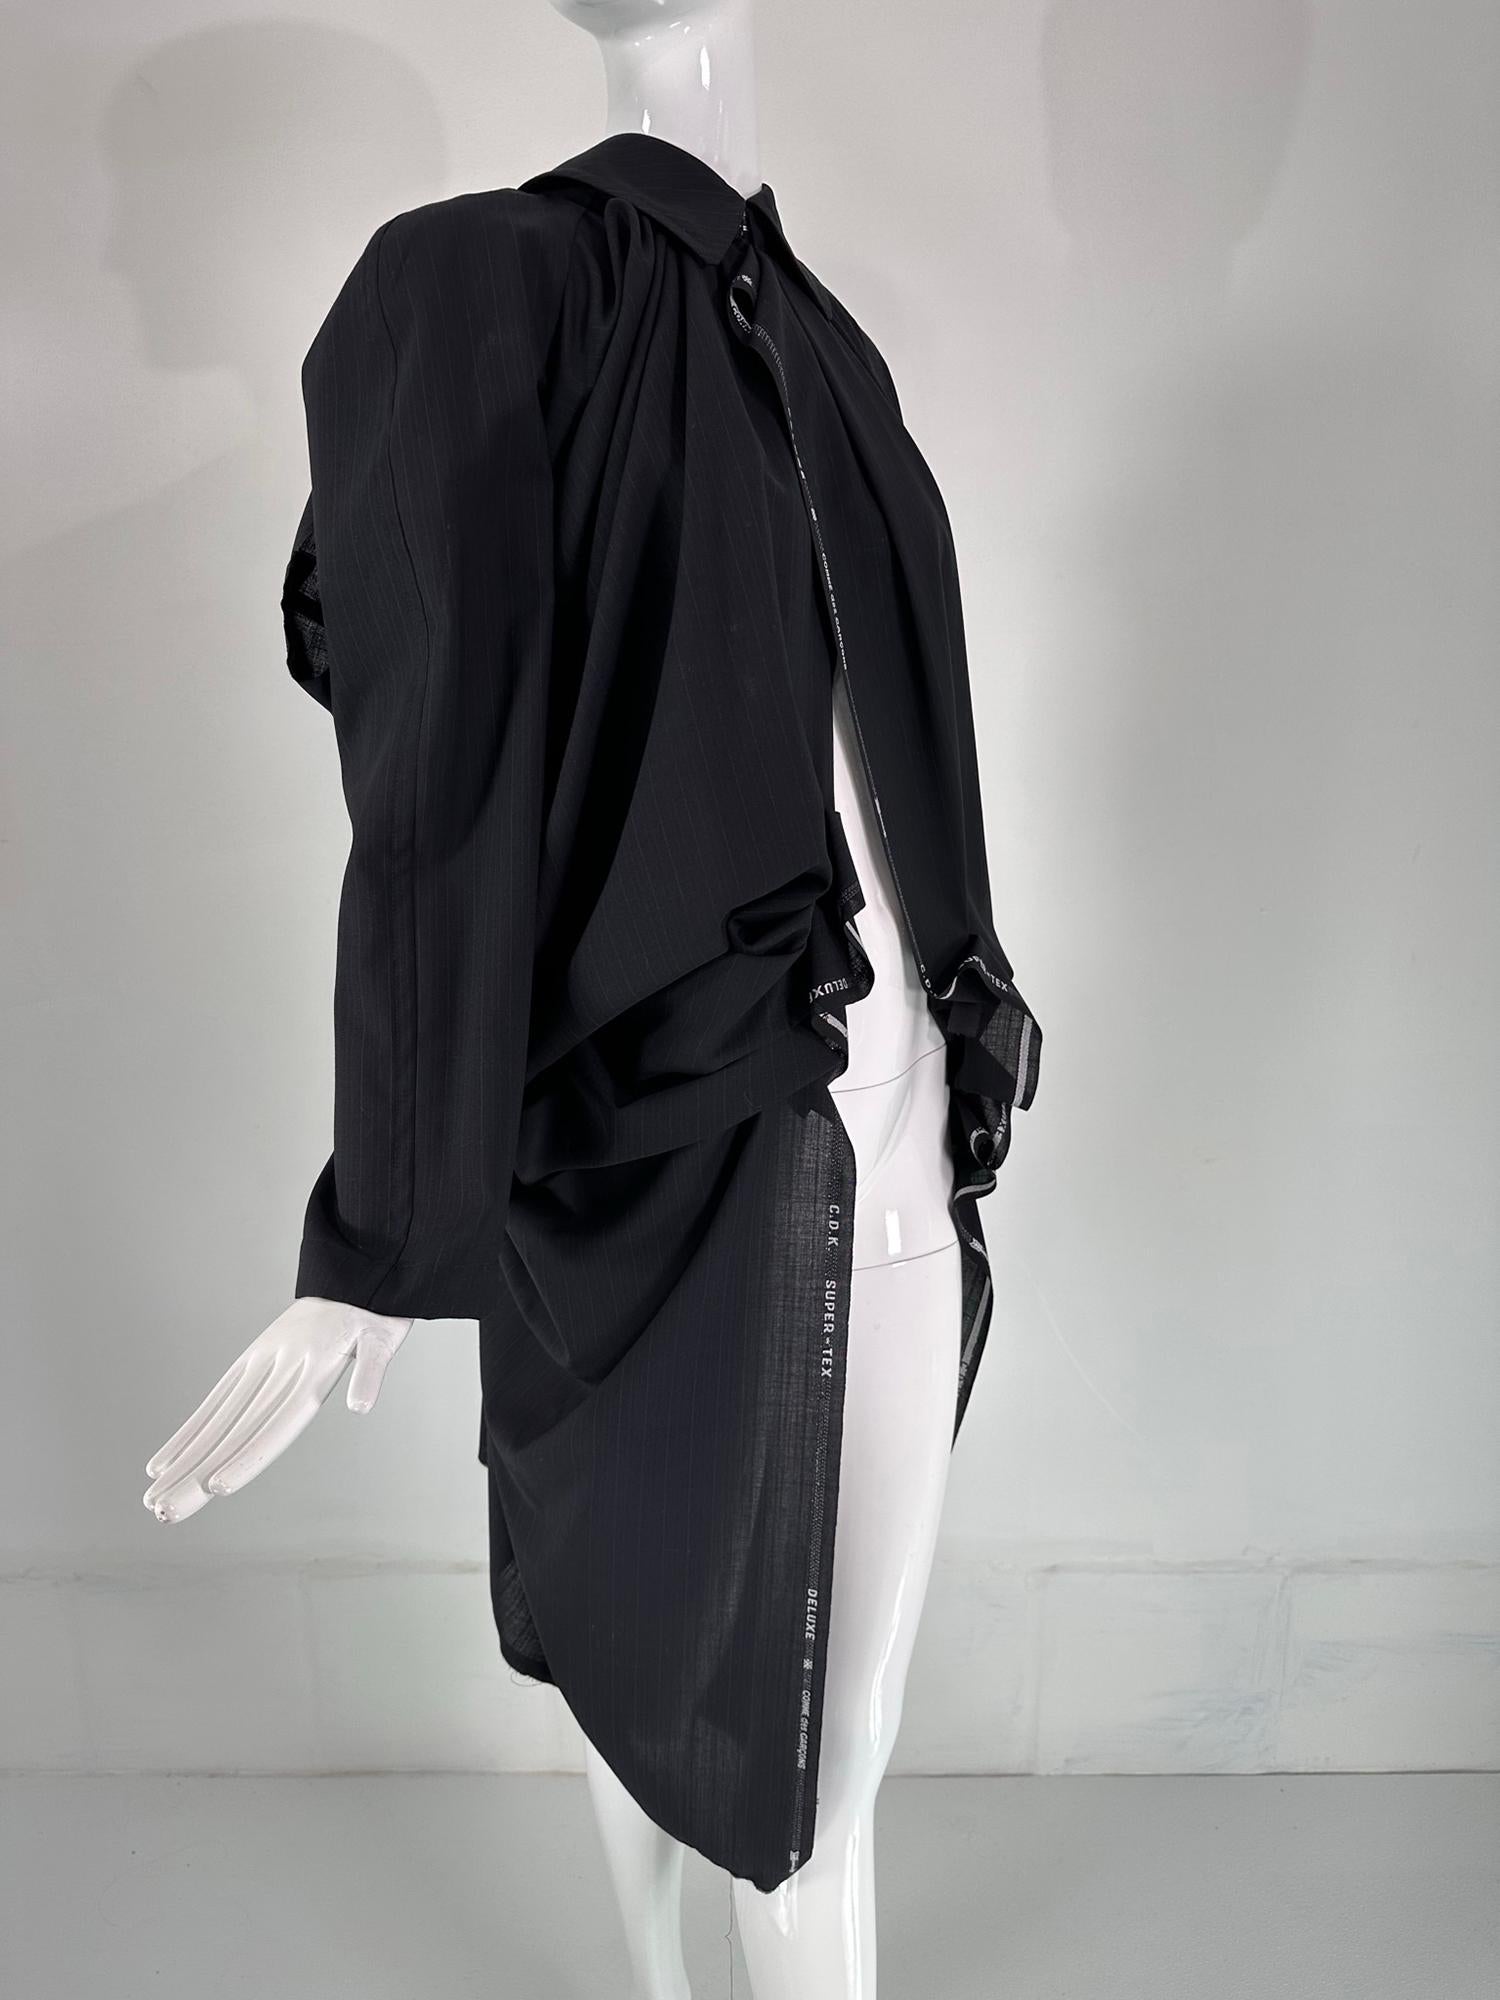 COMME DES GARCONS Black Pinstripe DECONSTRUCTED SELVEDGE COAT 2005 In Good Condition For Sale In West Palm Beach, FL